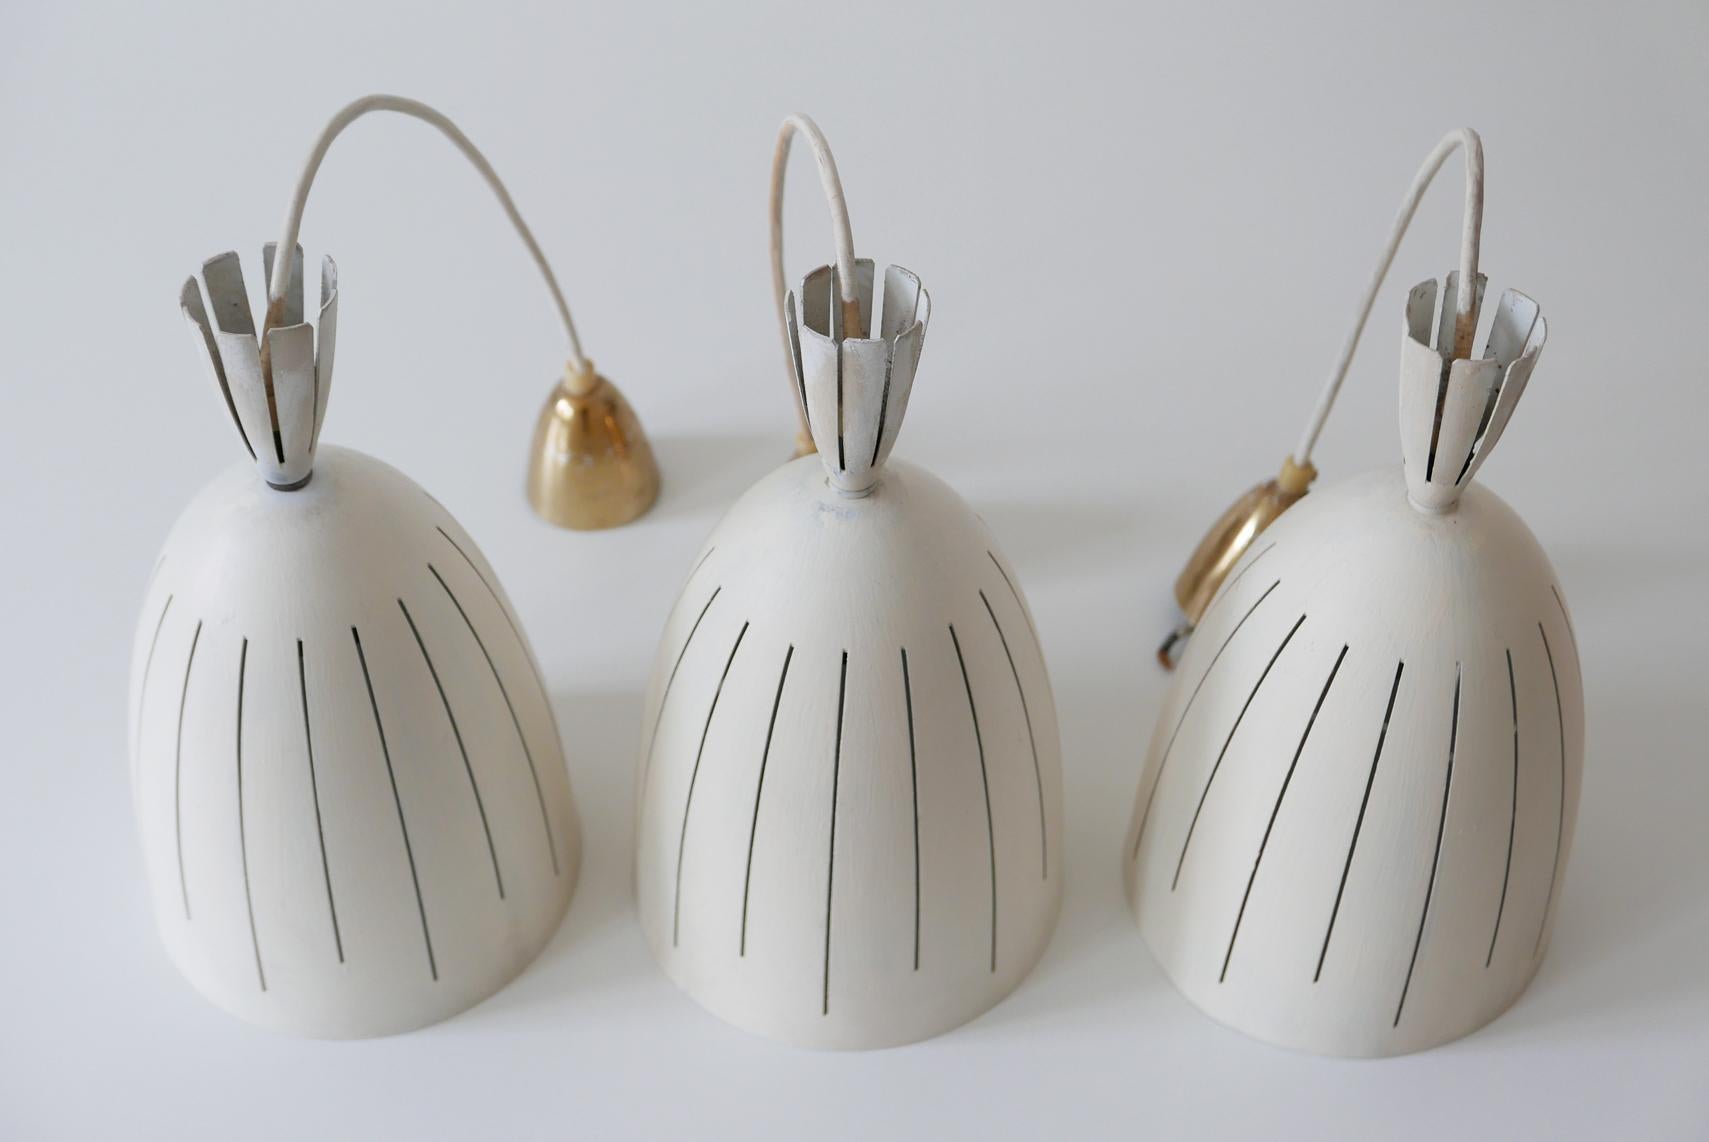 Set of Three Lovely Mid-Century Modern Diabolo Pendant Lamps, 1950s, Germany For Sale 11